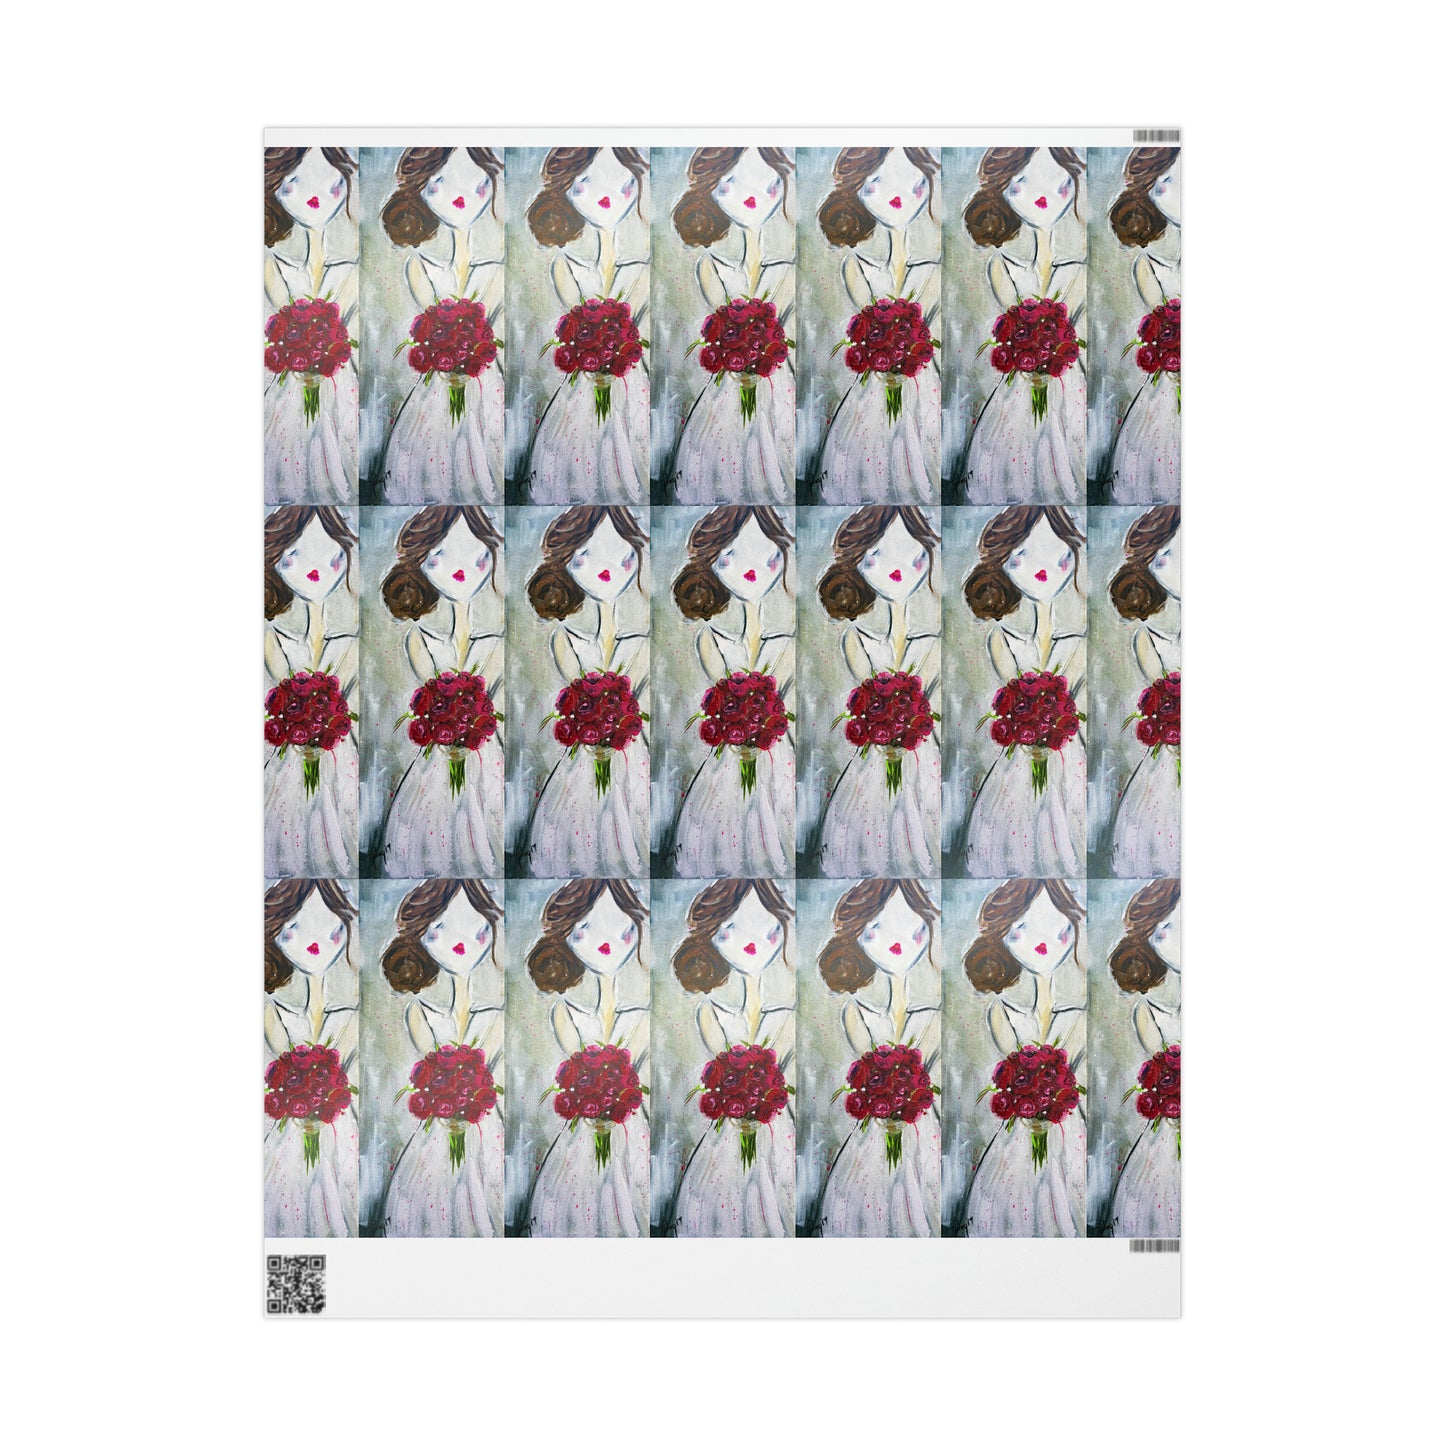 Bushing Bride with Roses bouquet (3 Sizes) Wrapping Papers